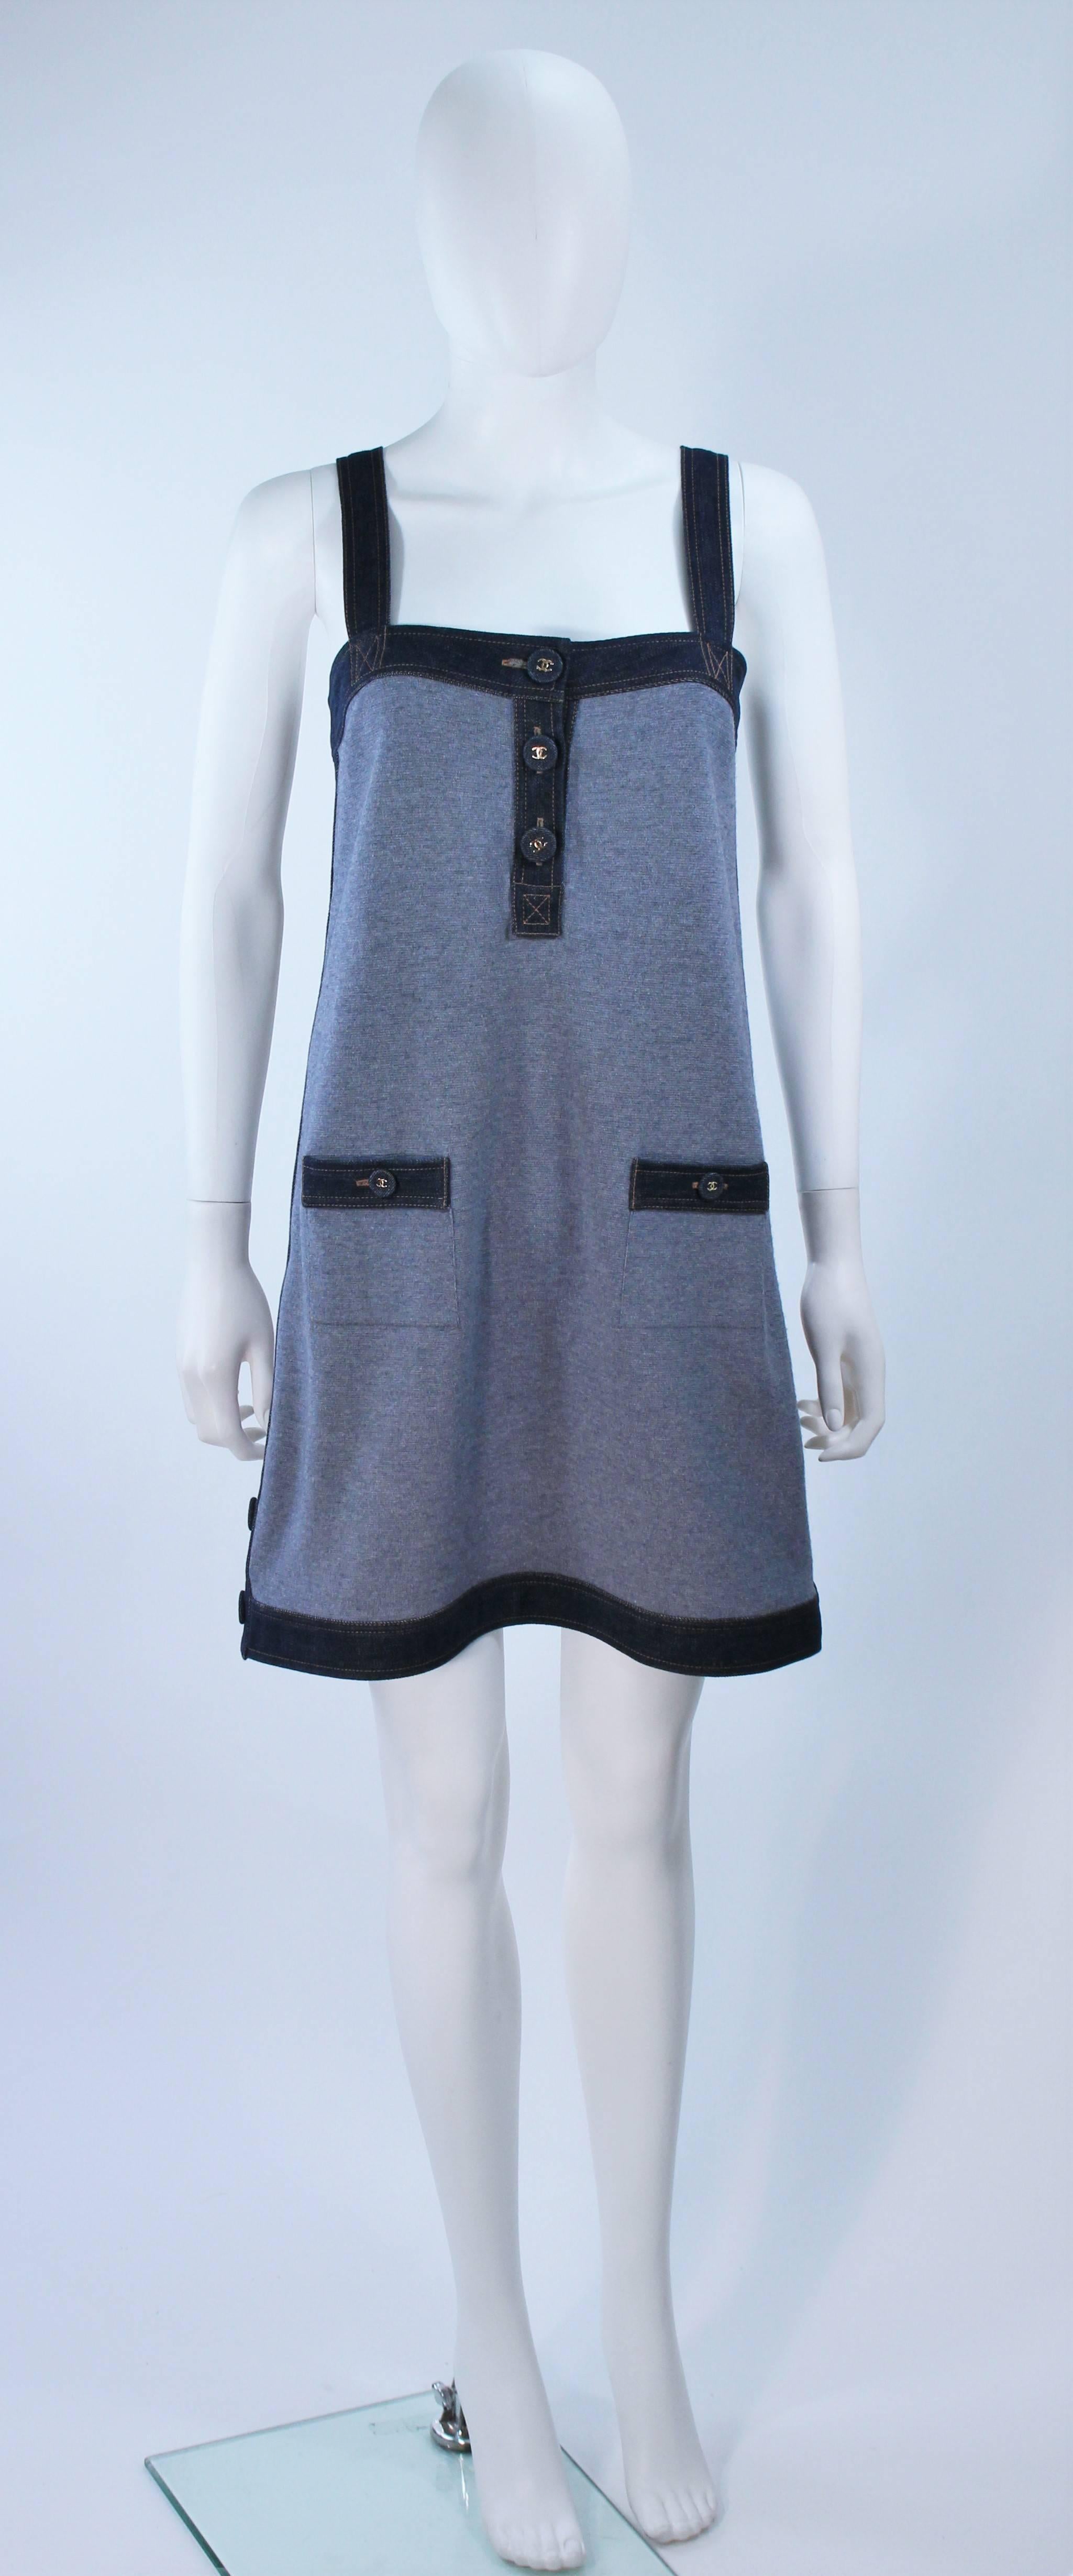 This Chanel dress is composed of a cashmere and silk blend with denim trim. Features gold 'CC' logo buttons and front pockets. In great condition. Made in Italy.

  **Please cross-reference measurements for personal accuracy. 

Measures